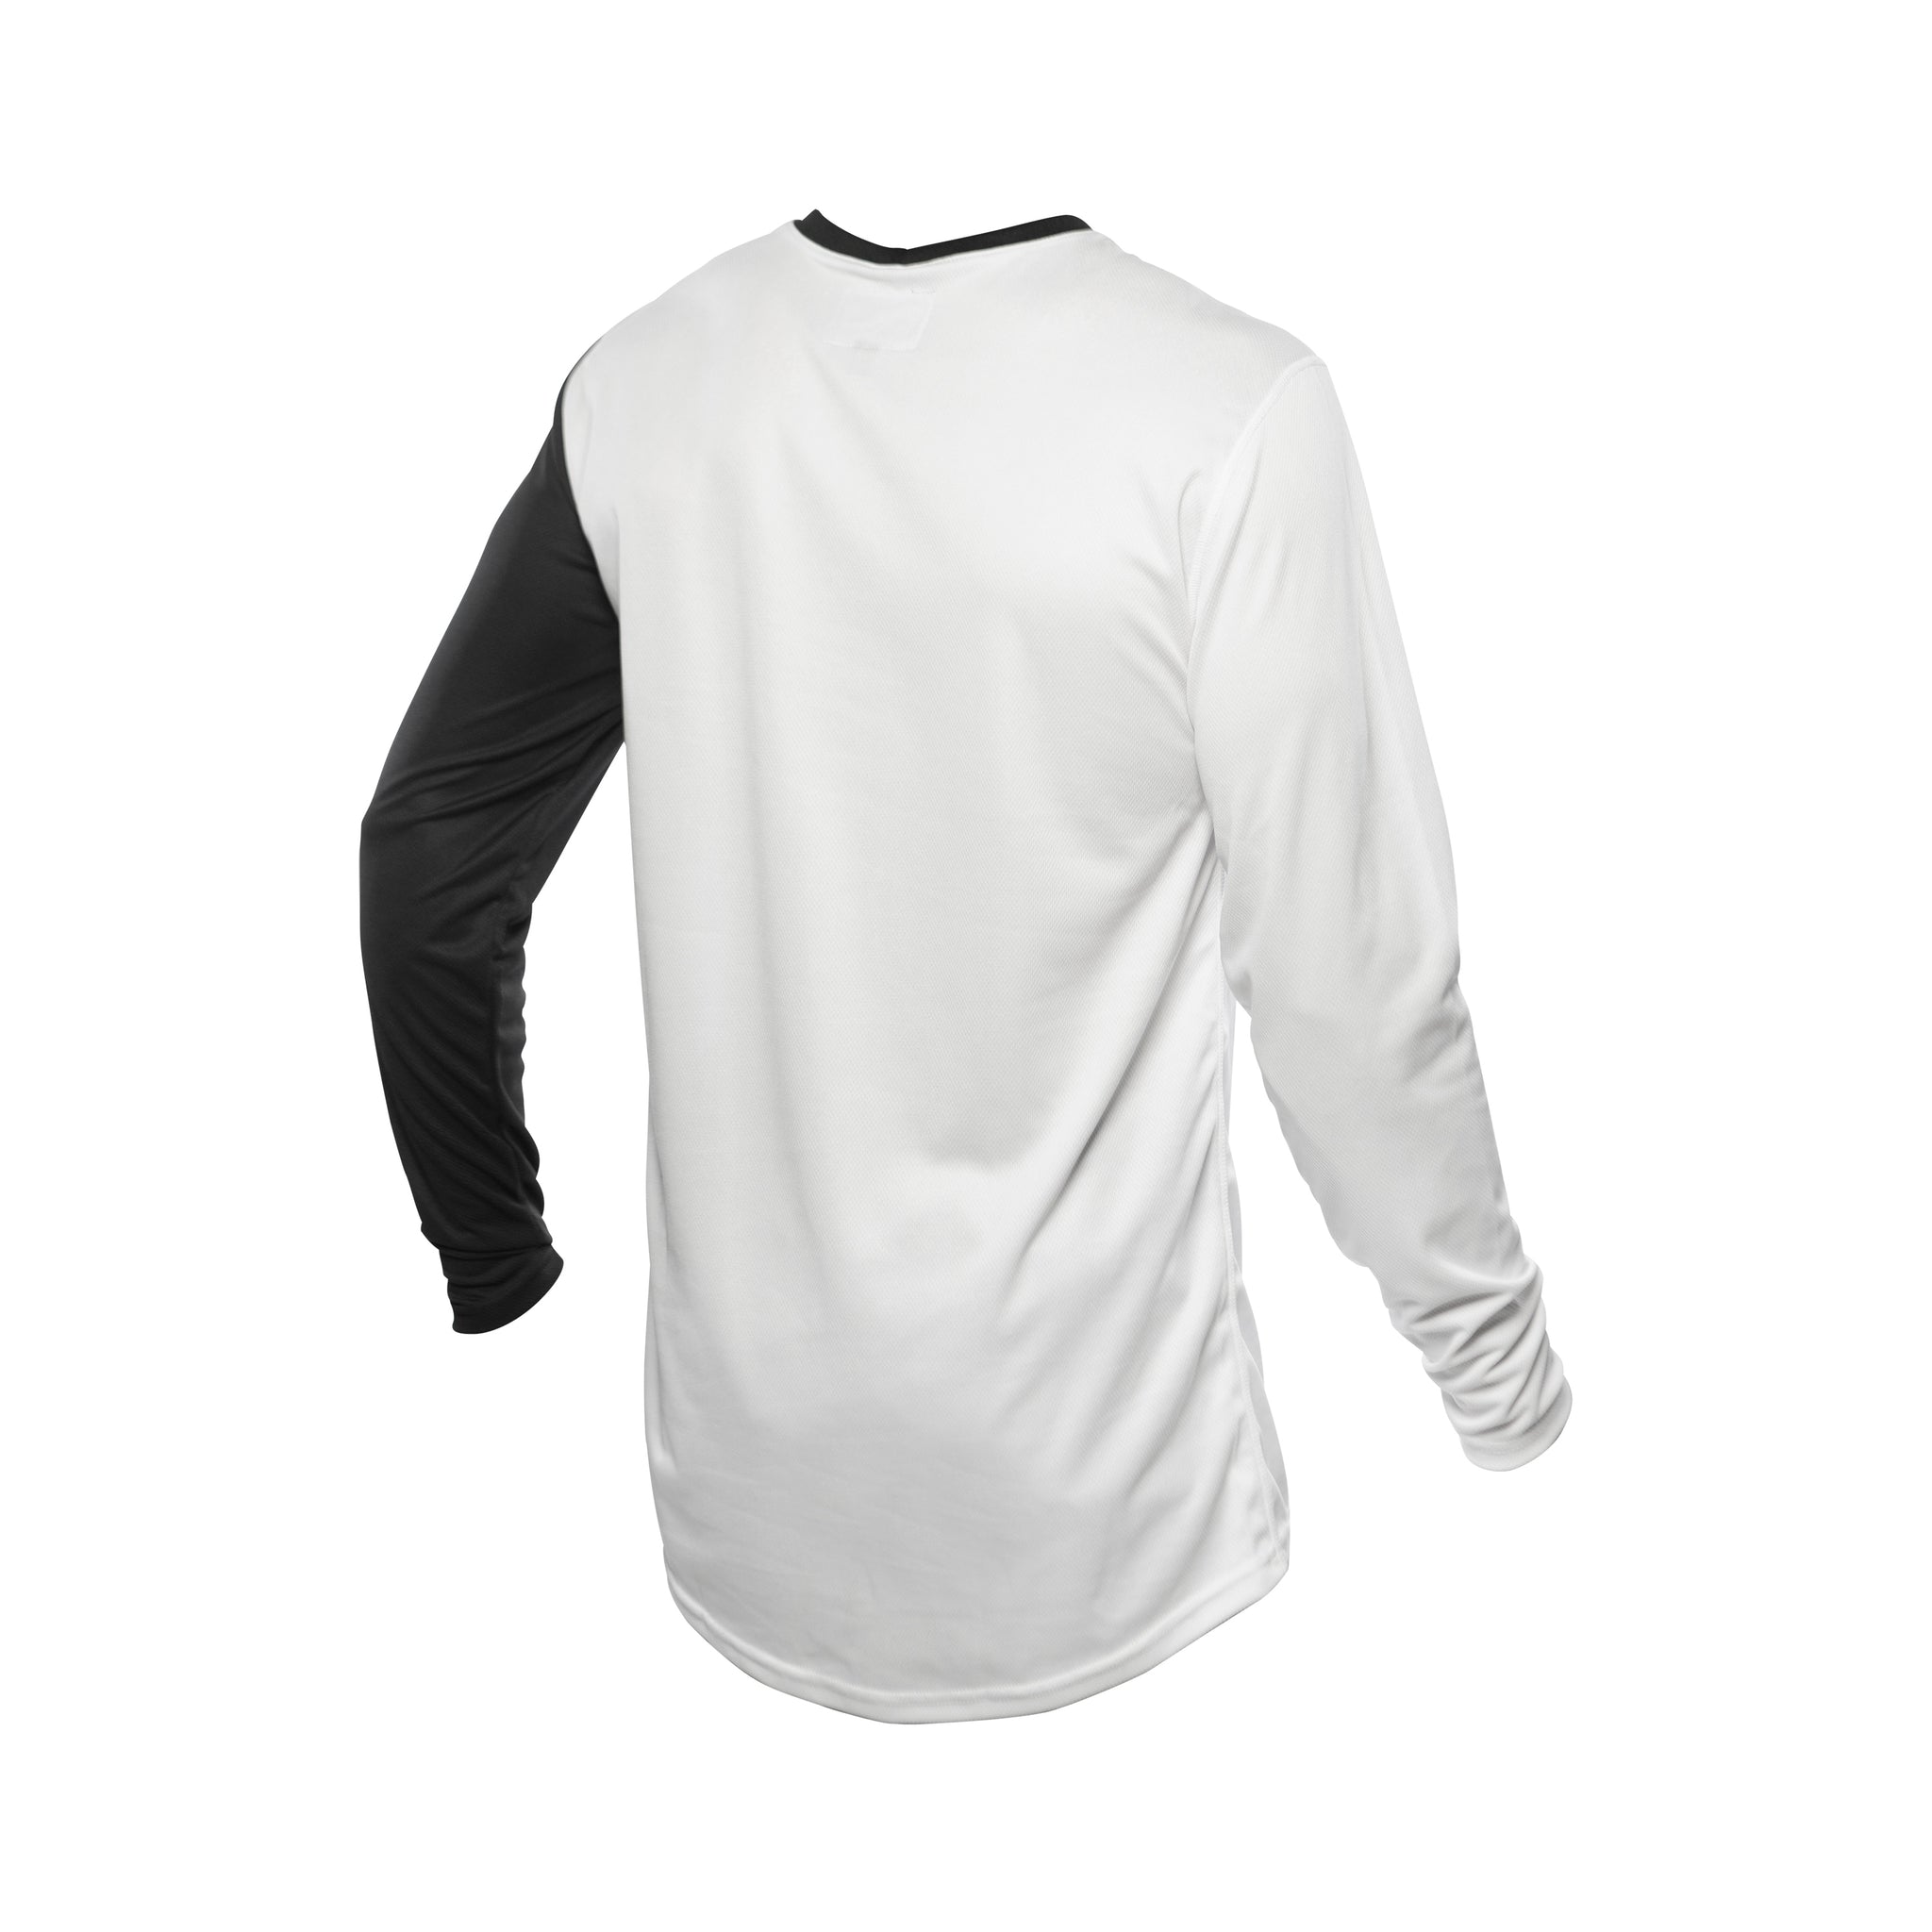 Carbon Youth Jersey - White